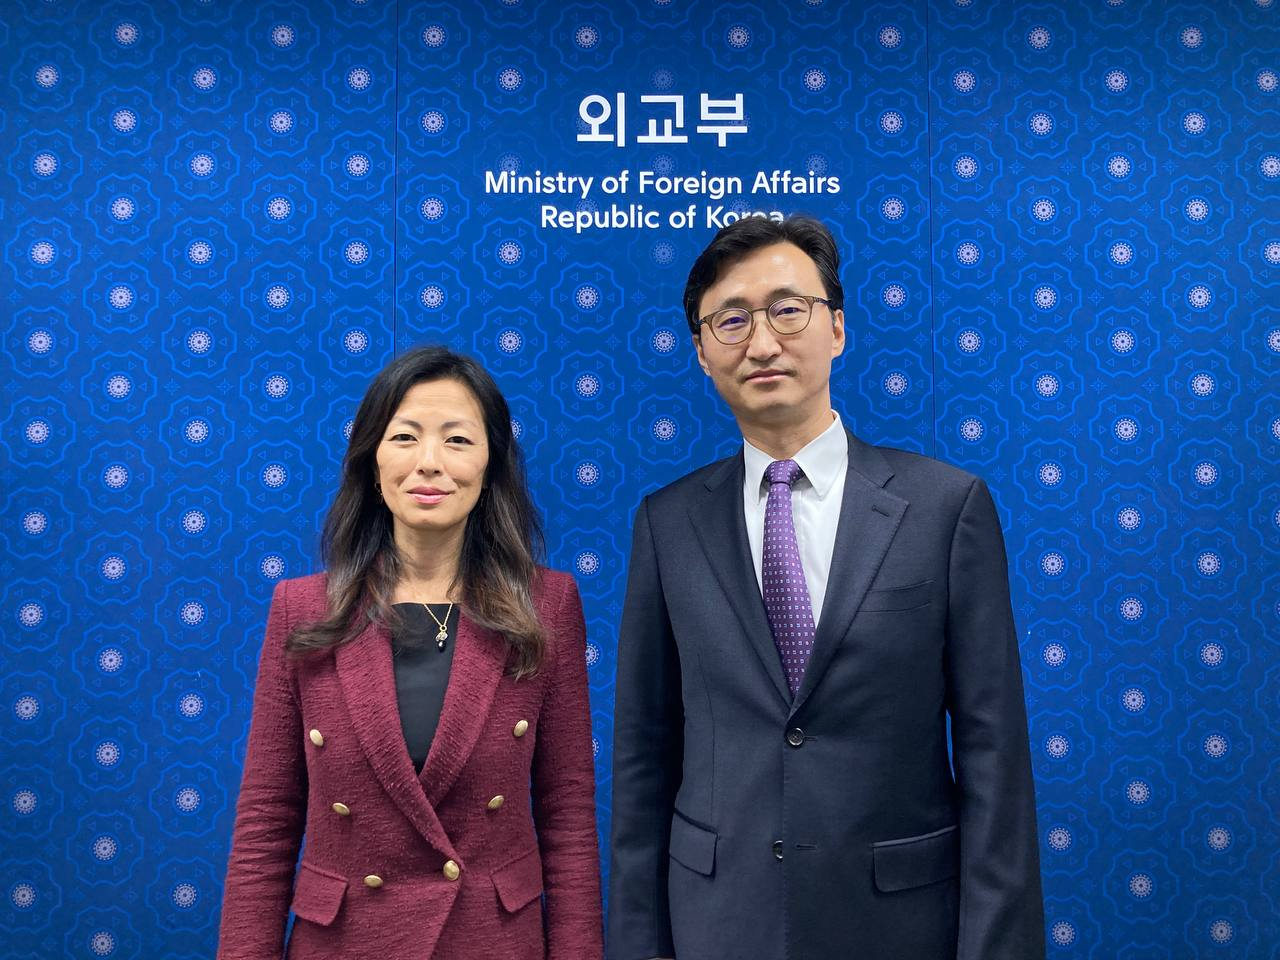 Director General for North Korean Nuclear Affairs Lee Tae-woo of South Korea's Foreign Ministry (right) pose with US Deputy Special Representative for North Korea Jung Pak in Seoul on Wednesday. (Ministry of Foreign Affairs)